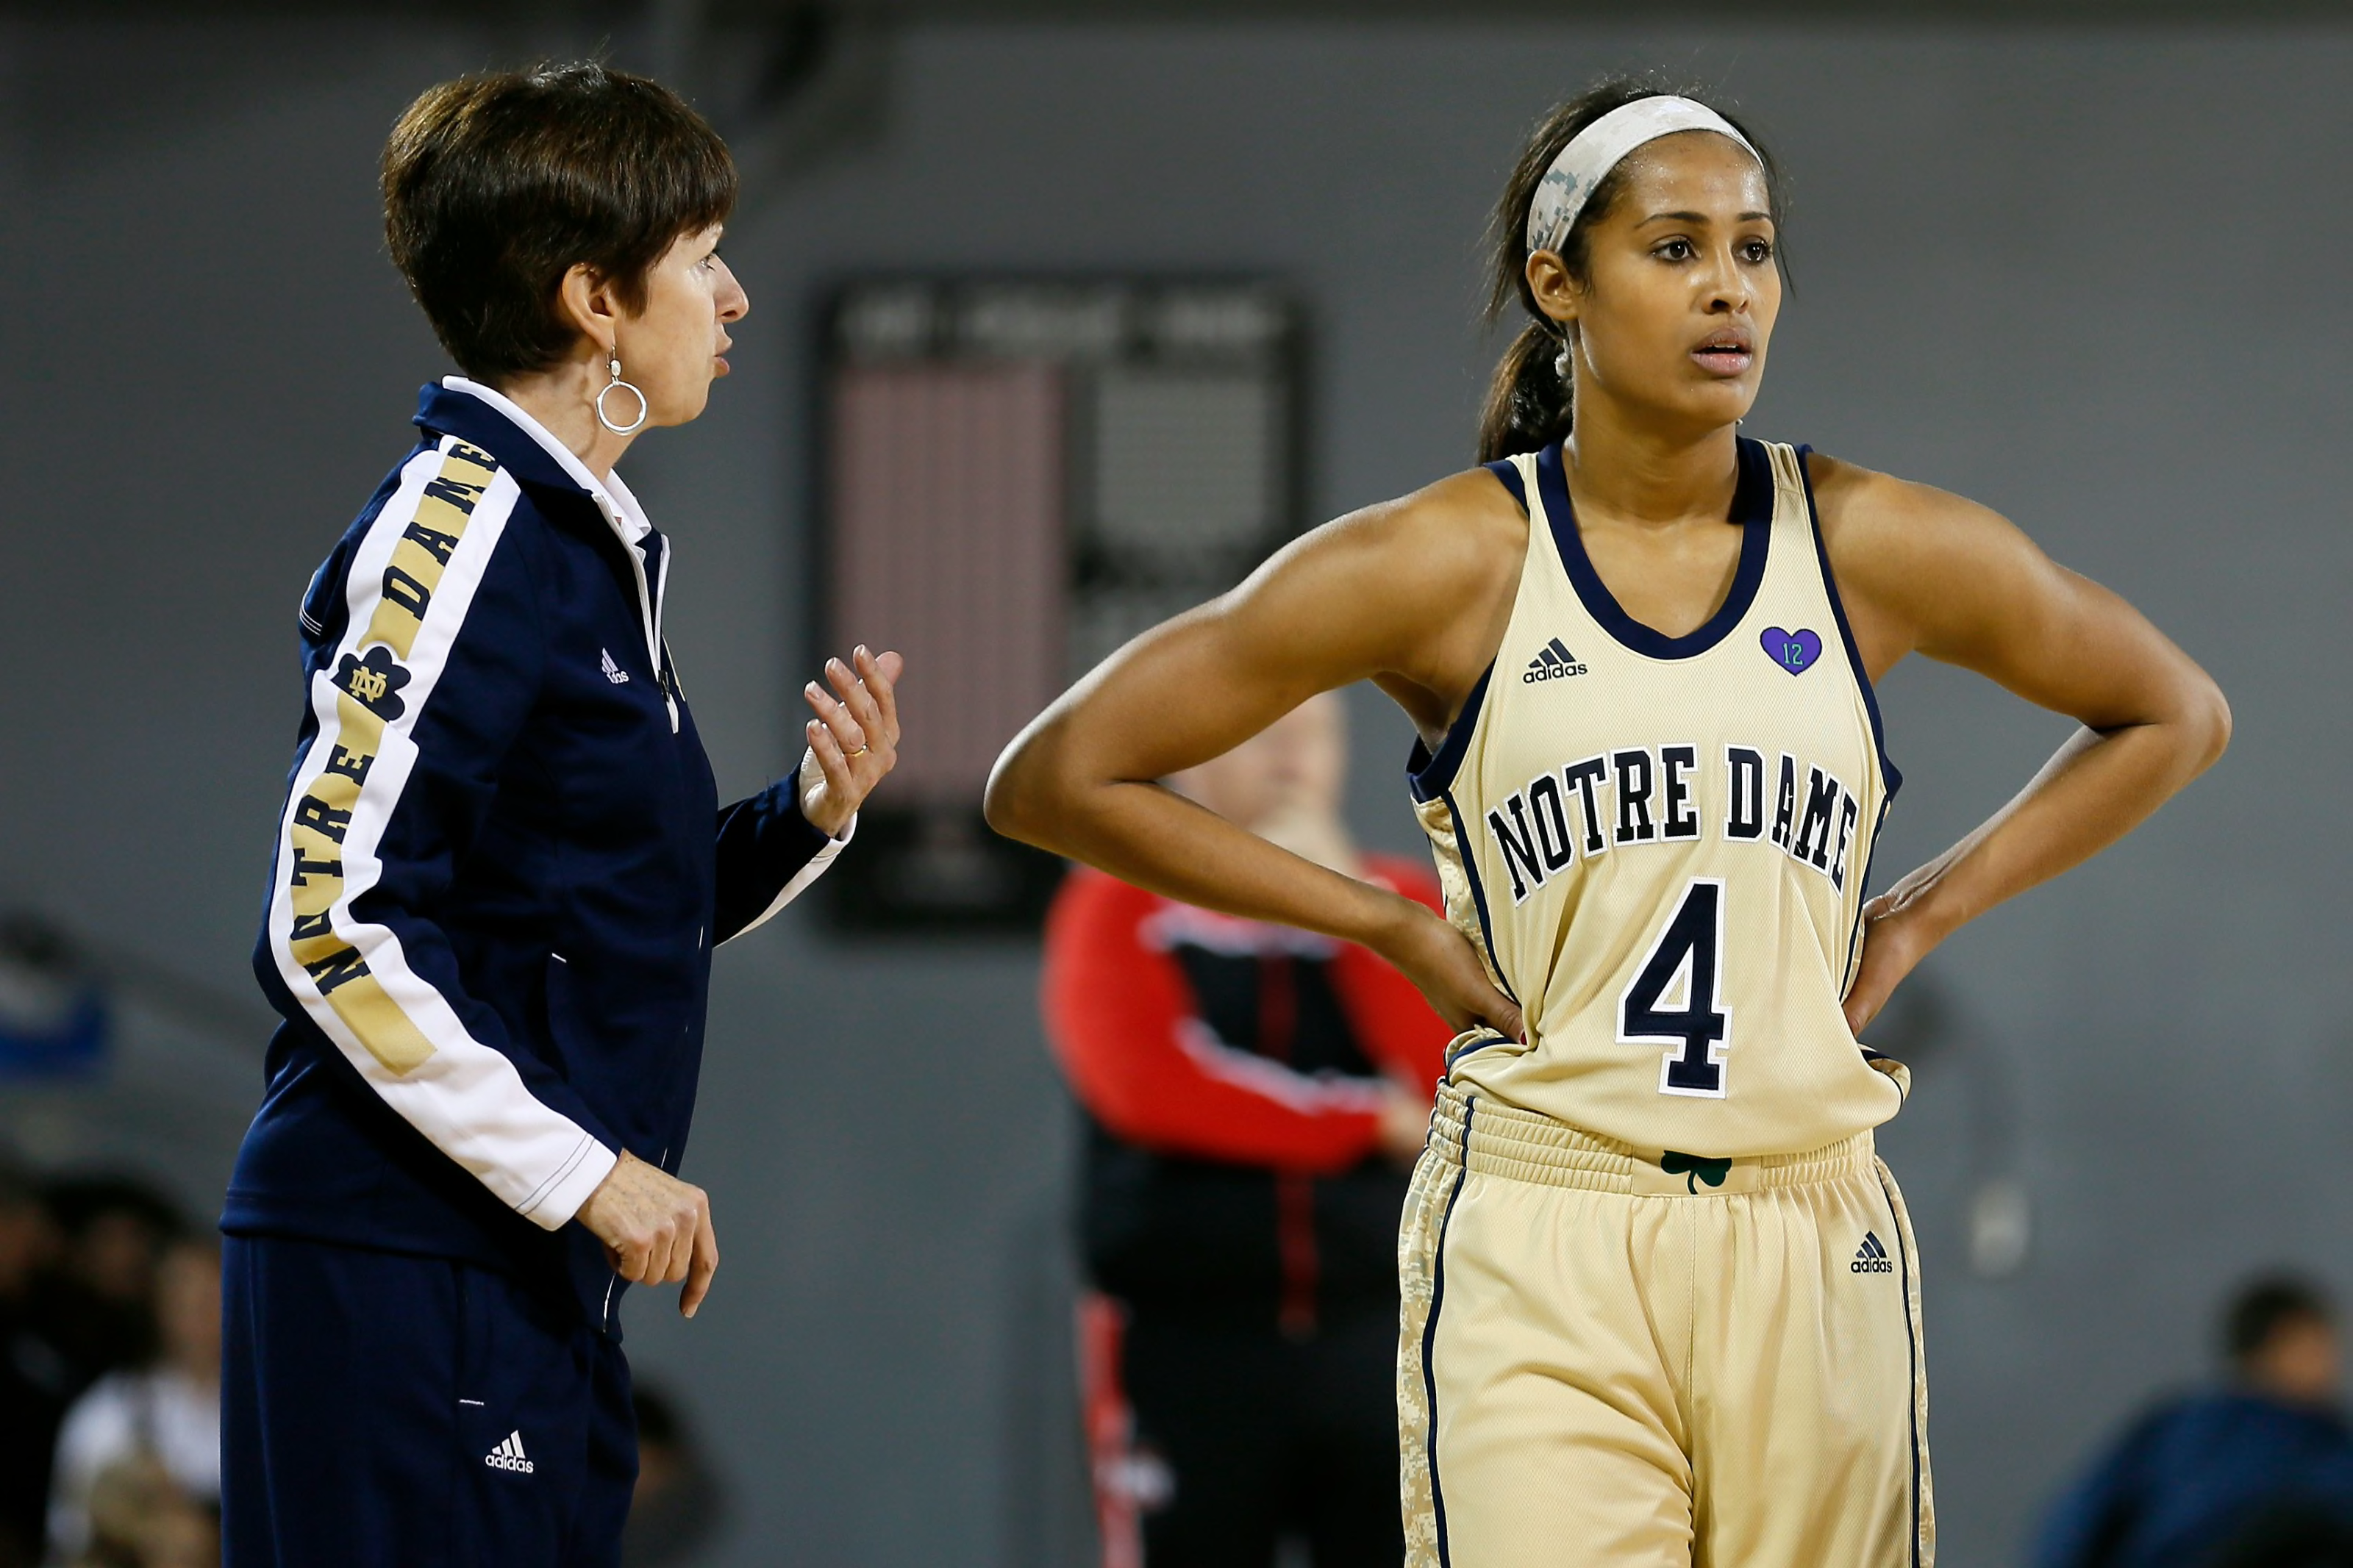 Notre Dame Women's Basketball The 4 Best Players of the McGraw Era